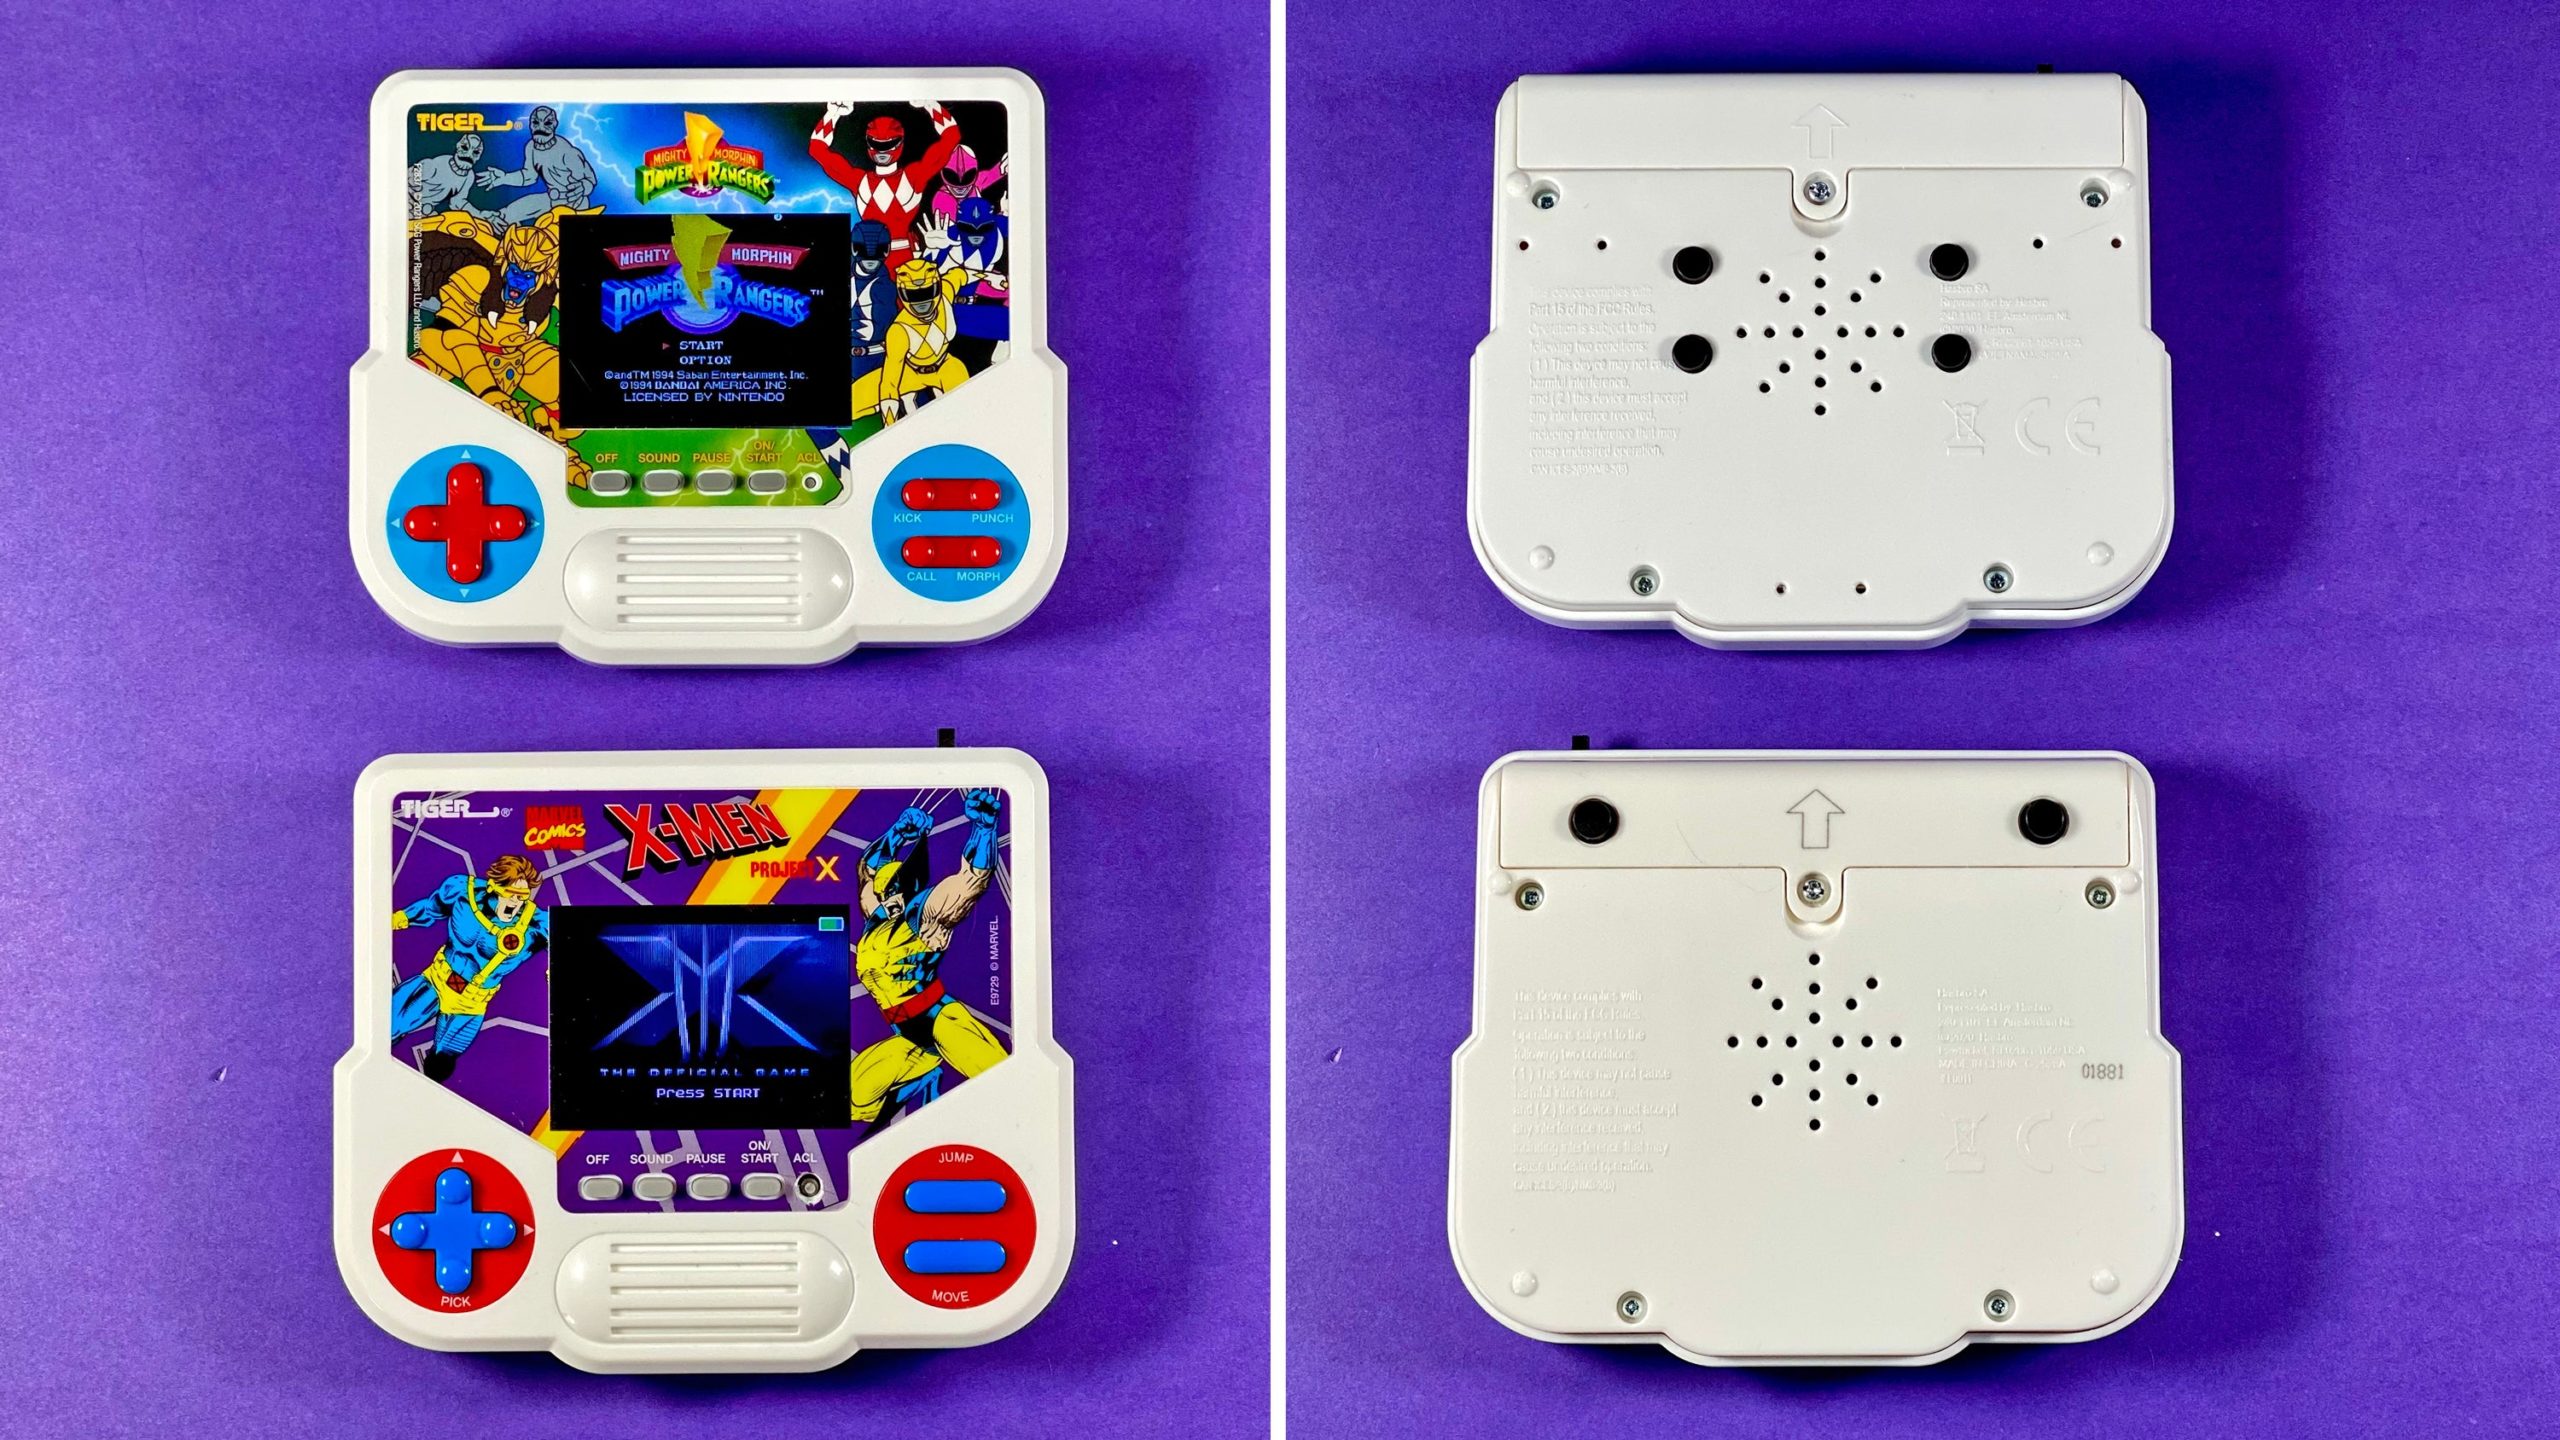 Fun Hack Turns Tiger Handhelds Into the Portable Emulator Every ’90s Kid Actually Wanted